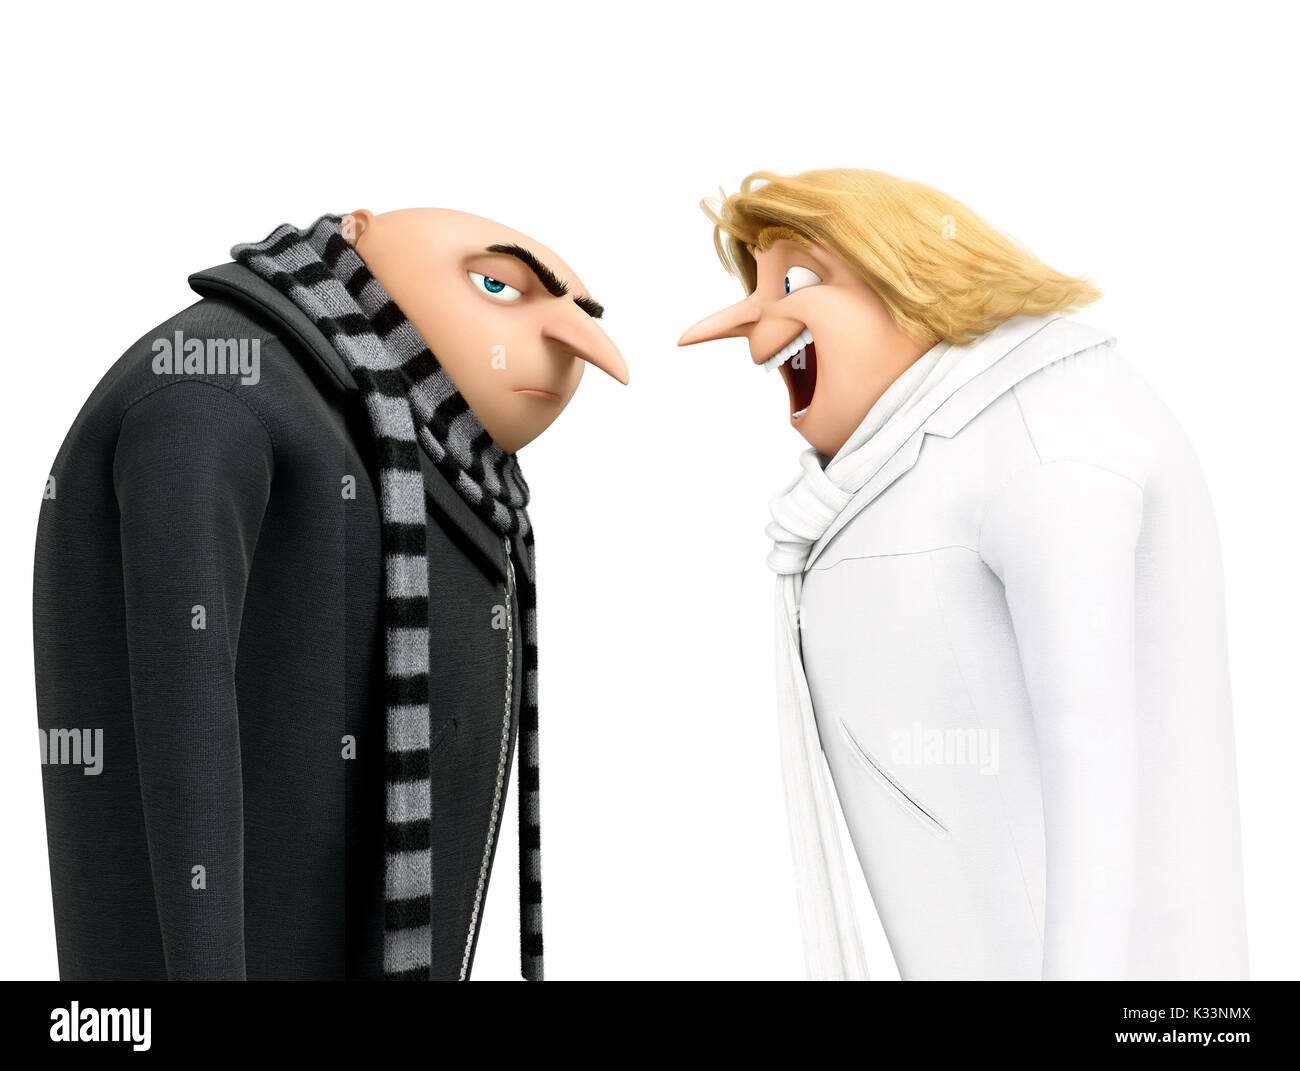 RELEASE DATE: June 30, 2017 TITLE: Despicable Me 3 STUDIO: Universal Pictures DIRECTOR: Kyle Balda, Pierre Coffin PLOT: Gru meets his long-lost charming, cheerful, and more successful twin brother Dru who wants to team up with him for one last criminal heist STARRING: Steve Carell as Gru / Dru (voice). (Credit Image: © DreamWorks Animation/Entertainment Pictures/ZUMAPRESS.com) Stock Photo